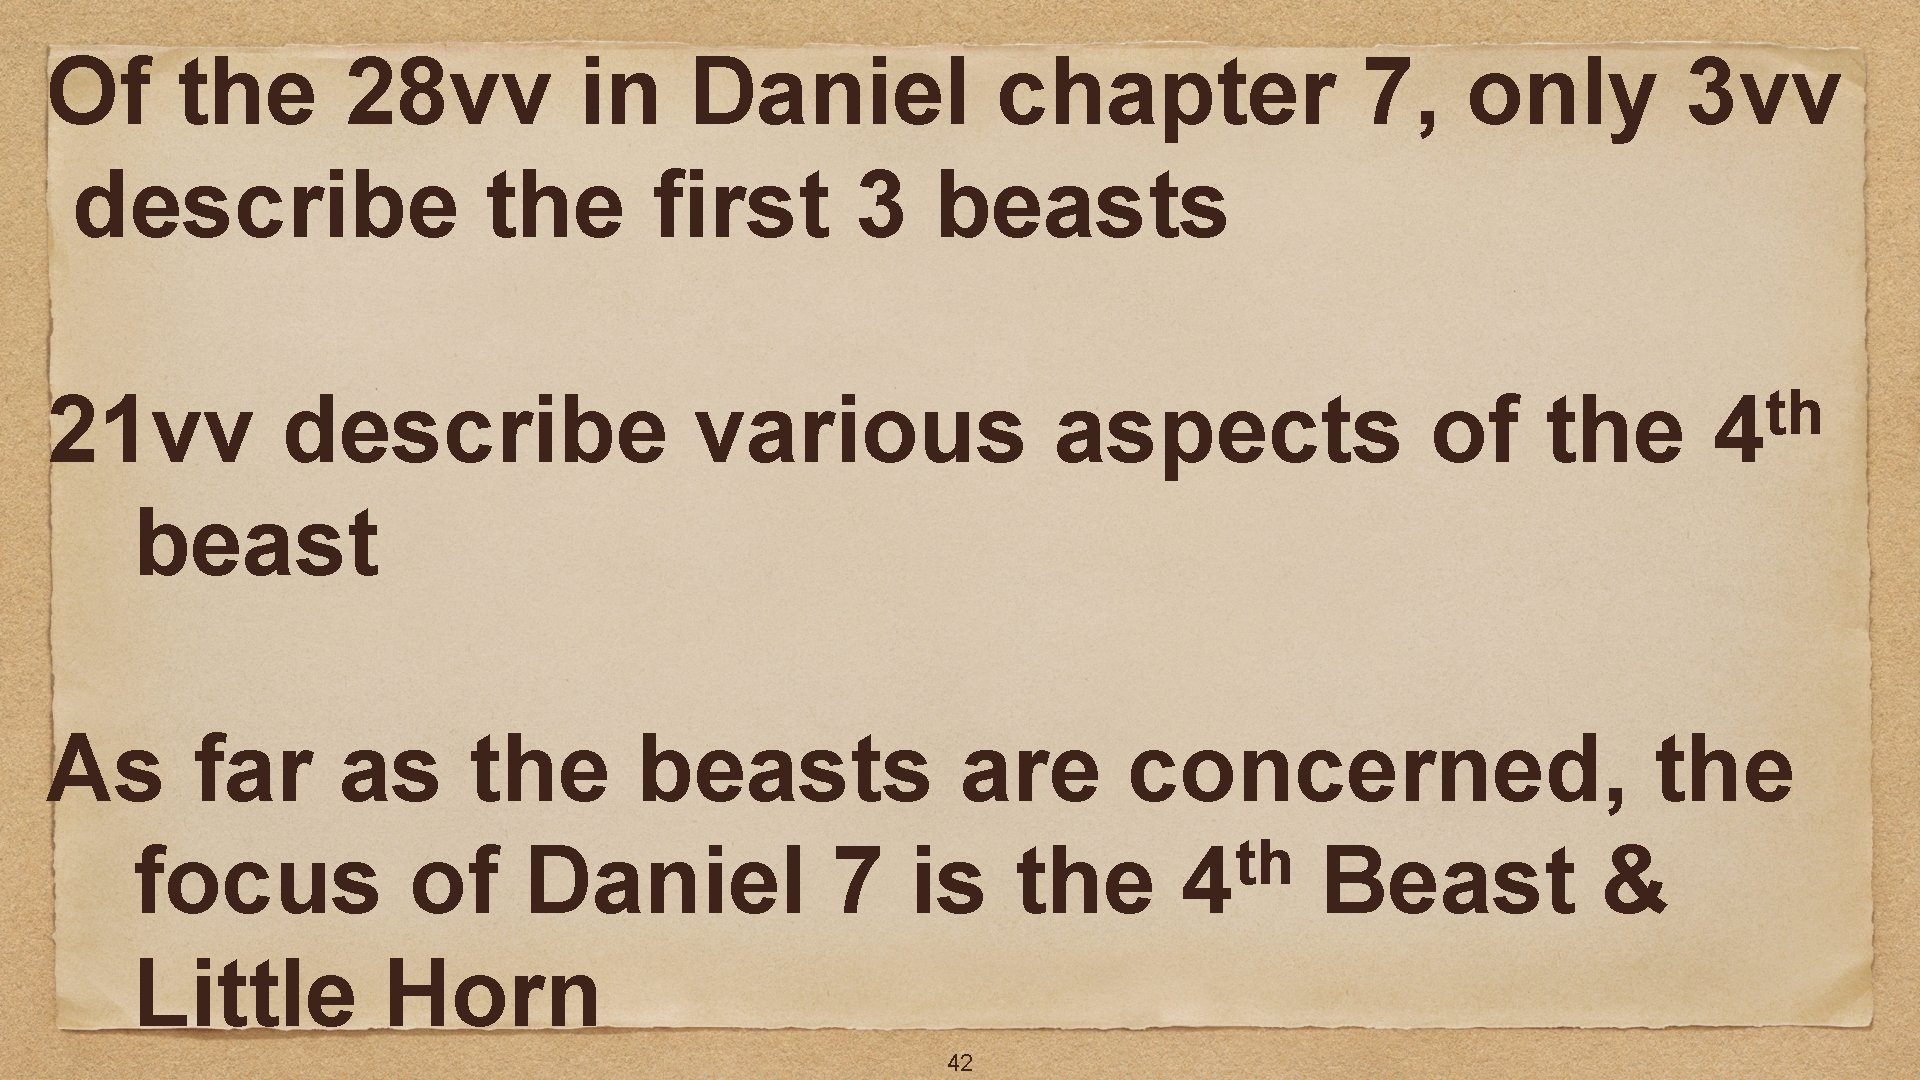 Of the 28 vv in Daniel chapter 7, only 3 vv describe the first